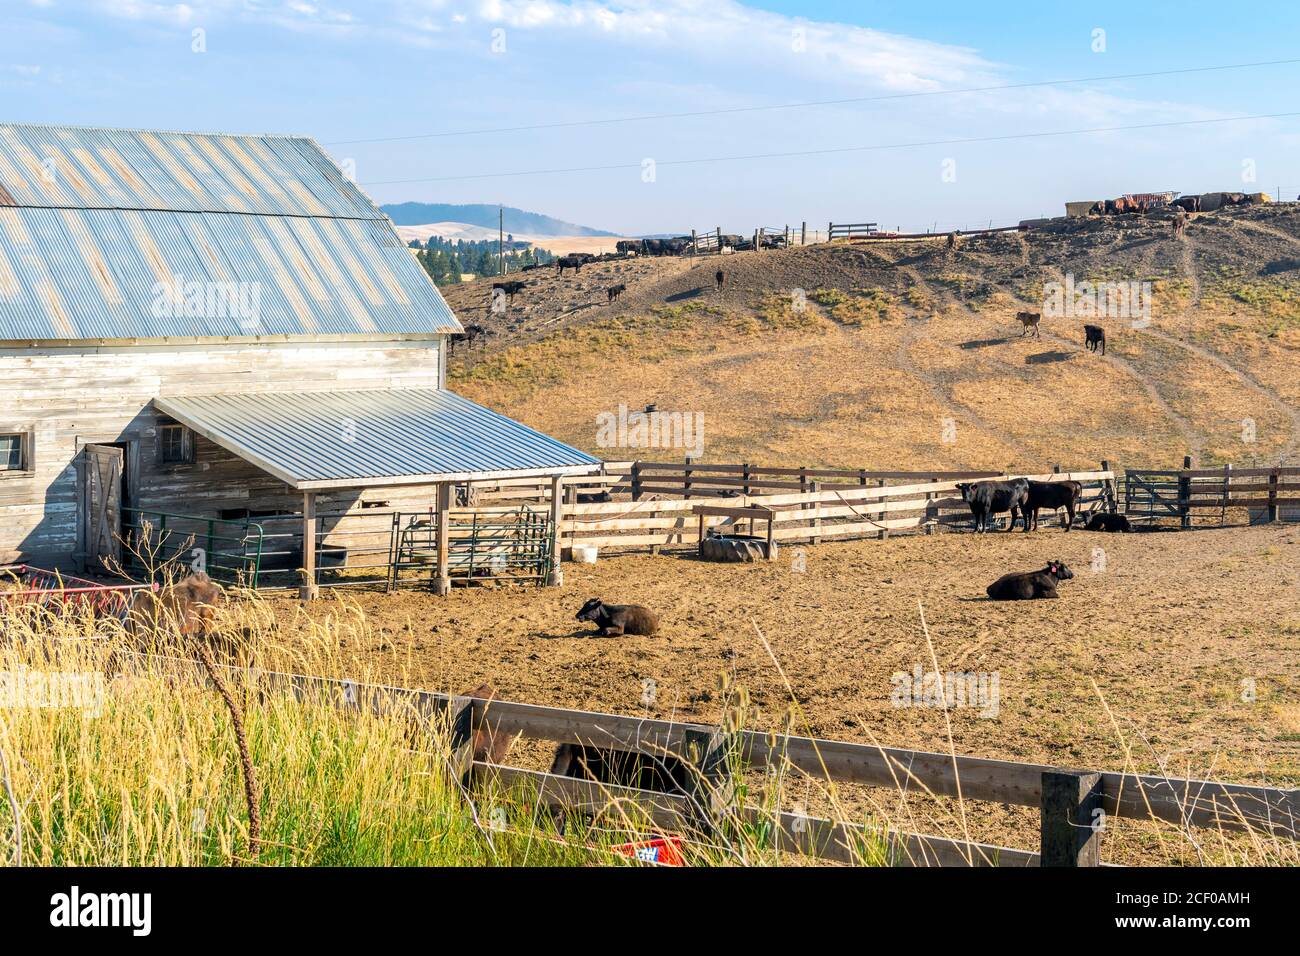 A small rustic barn with cows in a corral gated area and cattle on the hill in the high desert of the Inland Northwest, Washtucna, Washington USA. Stock Photo